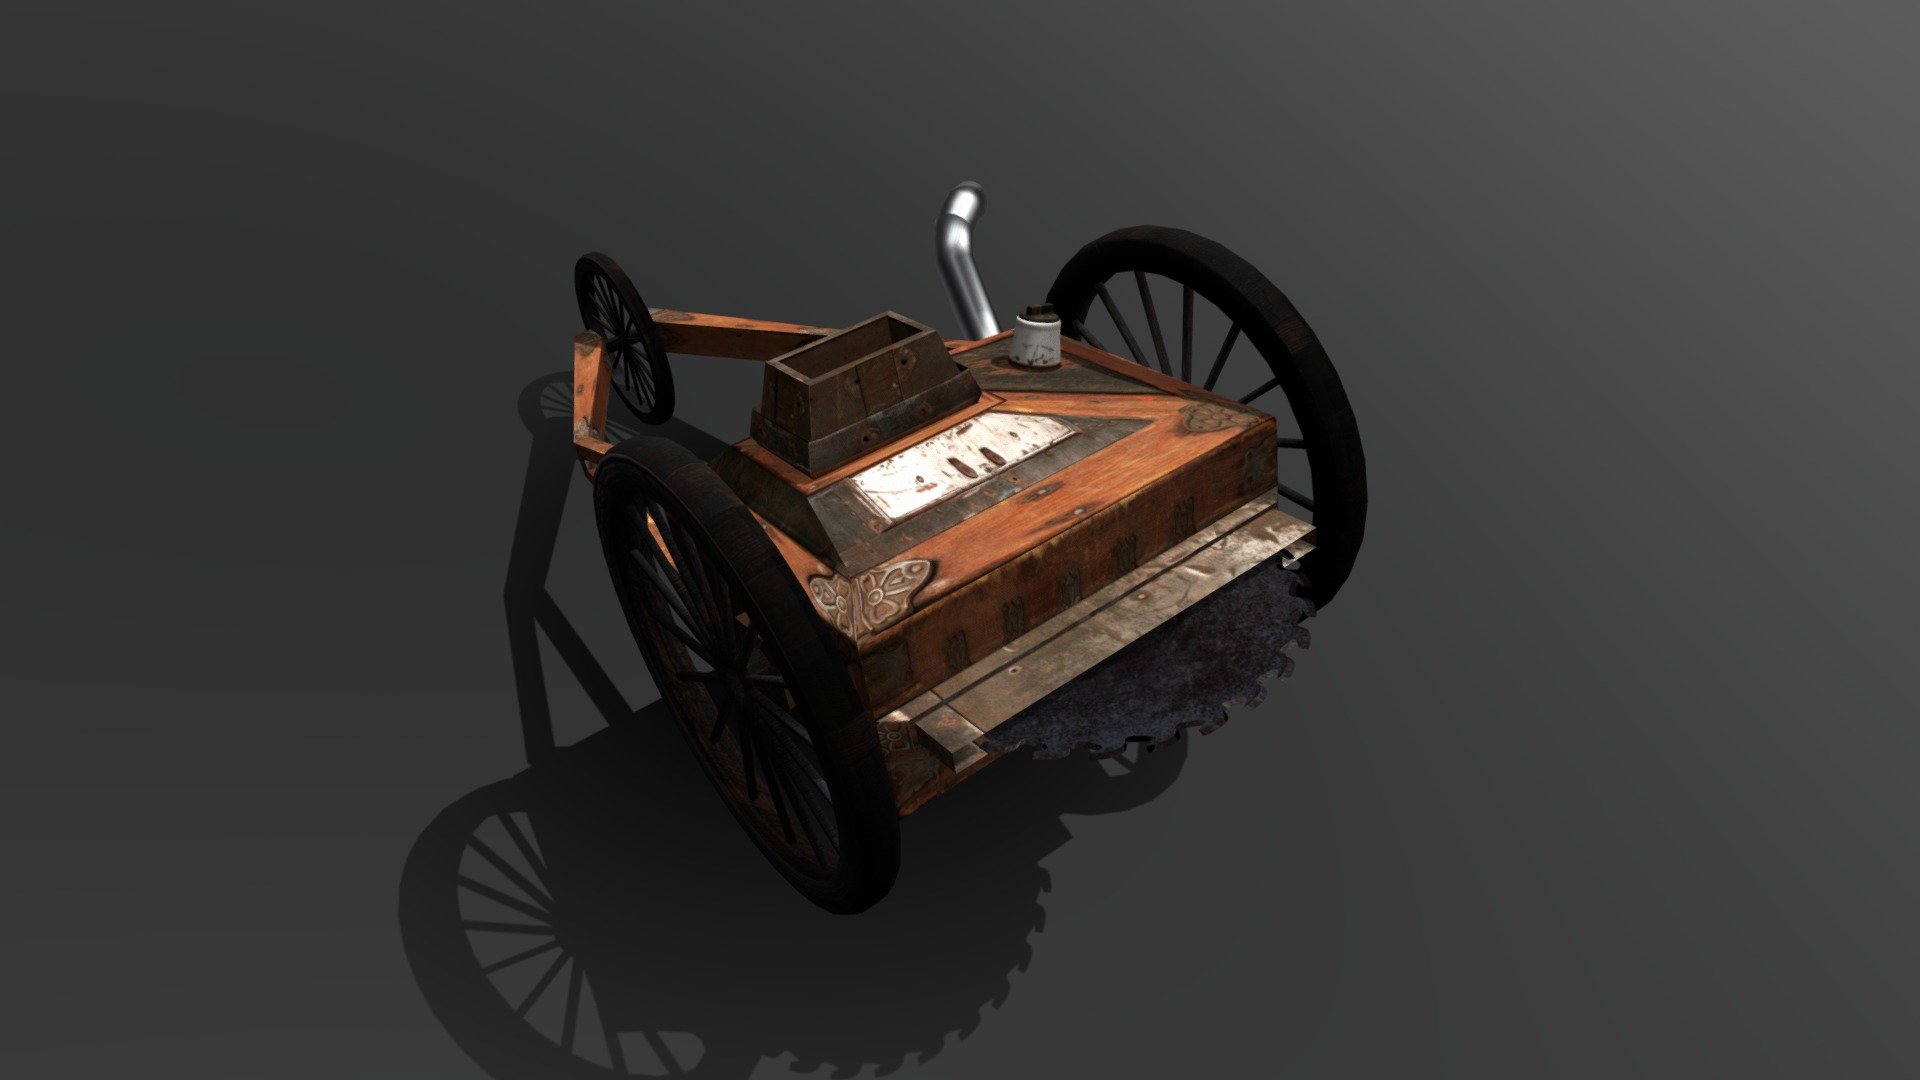 This is some kind of (gas-powered??? Is that a fuel cap?) tree cutting machine. Kind of medieval looking.

Learning how to use UV unwrapping to make something out of a picture of a steamer trunk. Kept it fairly square and simple. You can inspect the texture to see what's up. 

I did not texture the bottom. I actually didn't even look at the bottom until now&hellip; it's a little janky.

Y'know what? Don't look under this 3d model